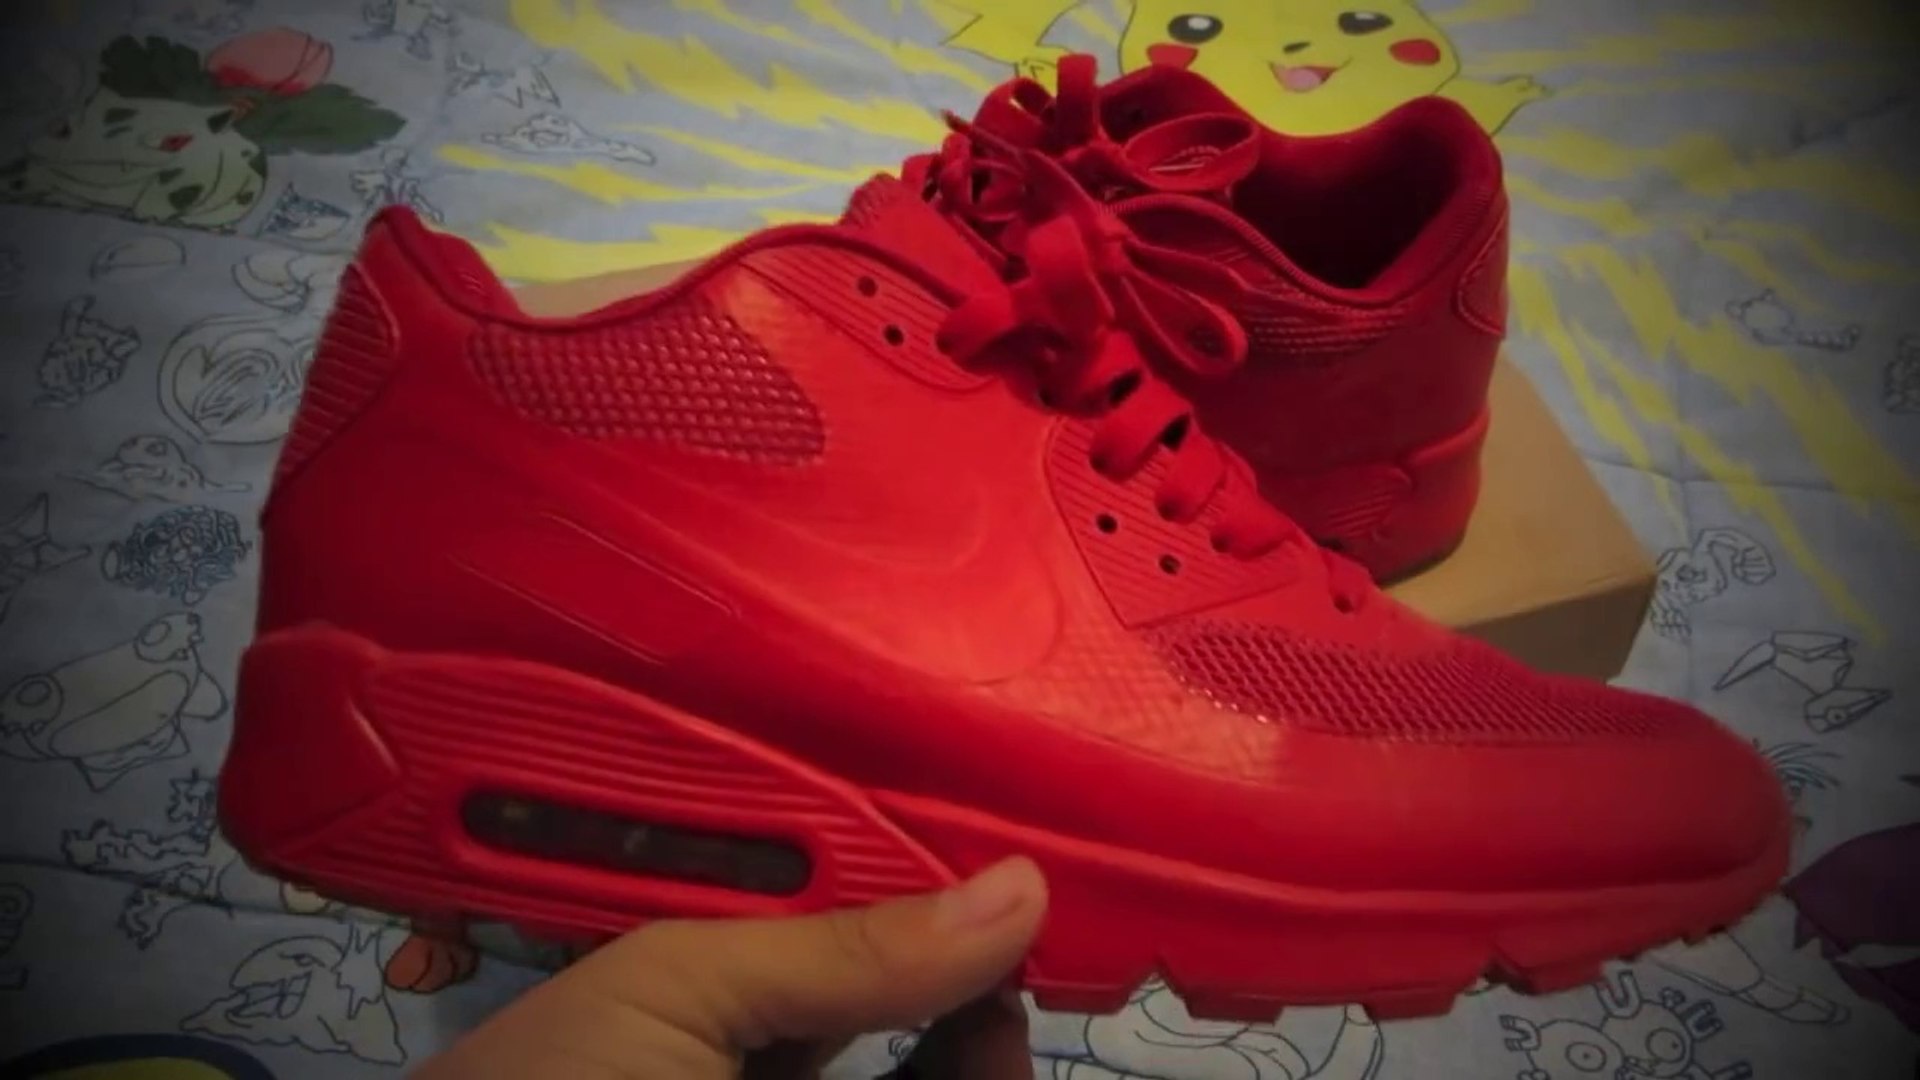 Cheap Nike Air Max Shoes free shipping,Replica Nike Air Max 90 Hyperfuse  Solar Red─影片 Dailymotion